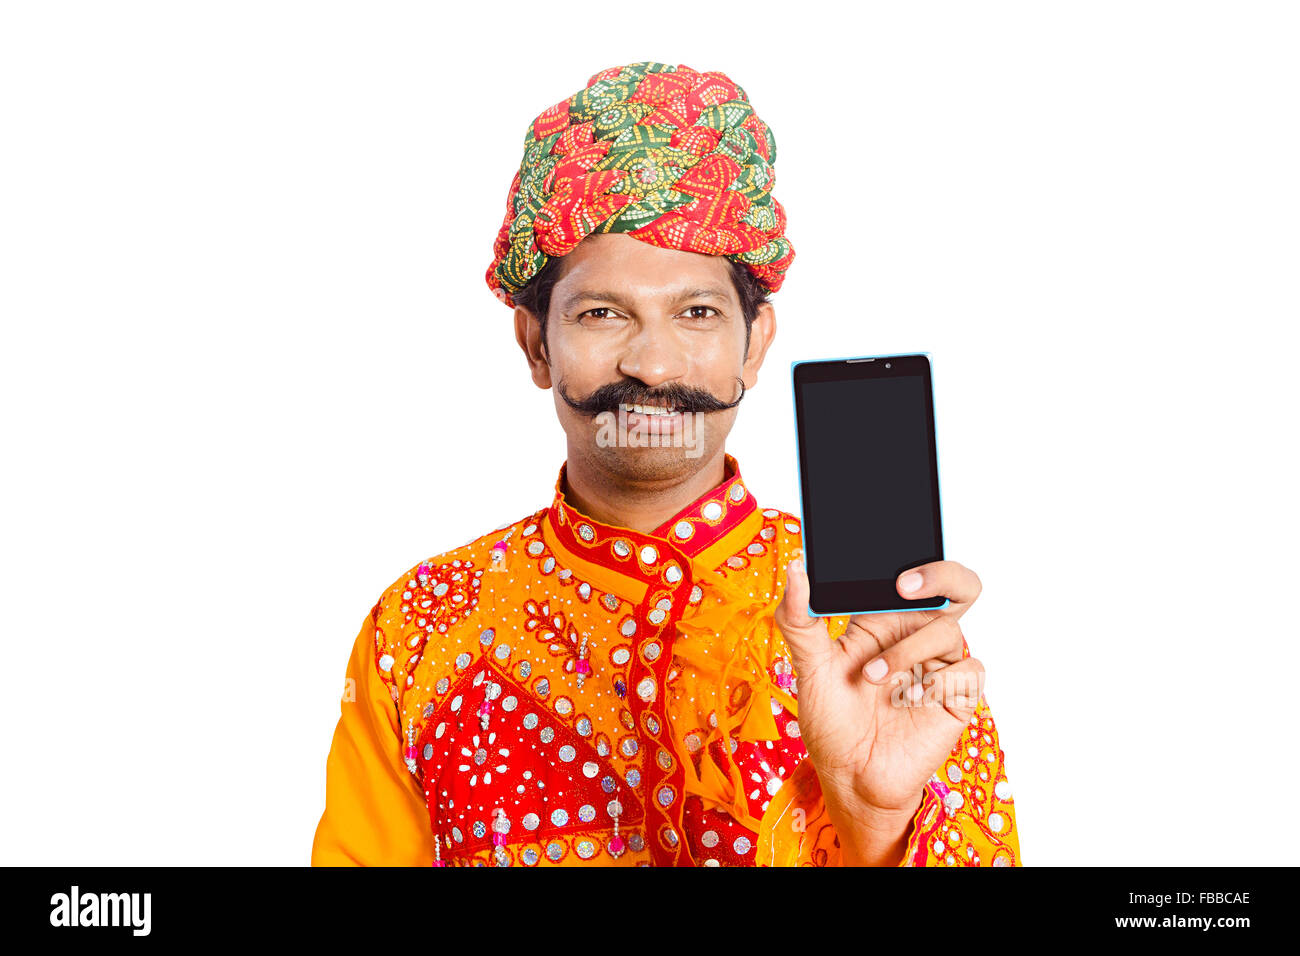 1 indian Rural Gujrati Villager Mobile Phone Quality showing Stock Photo